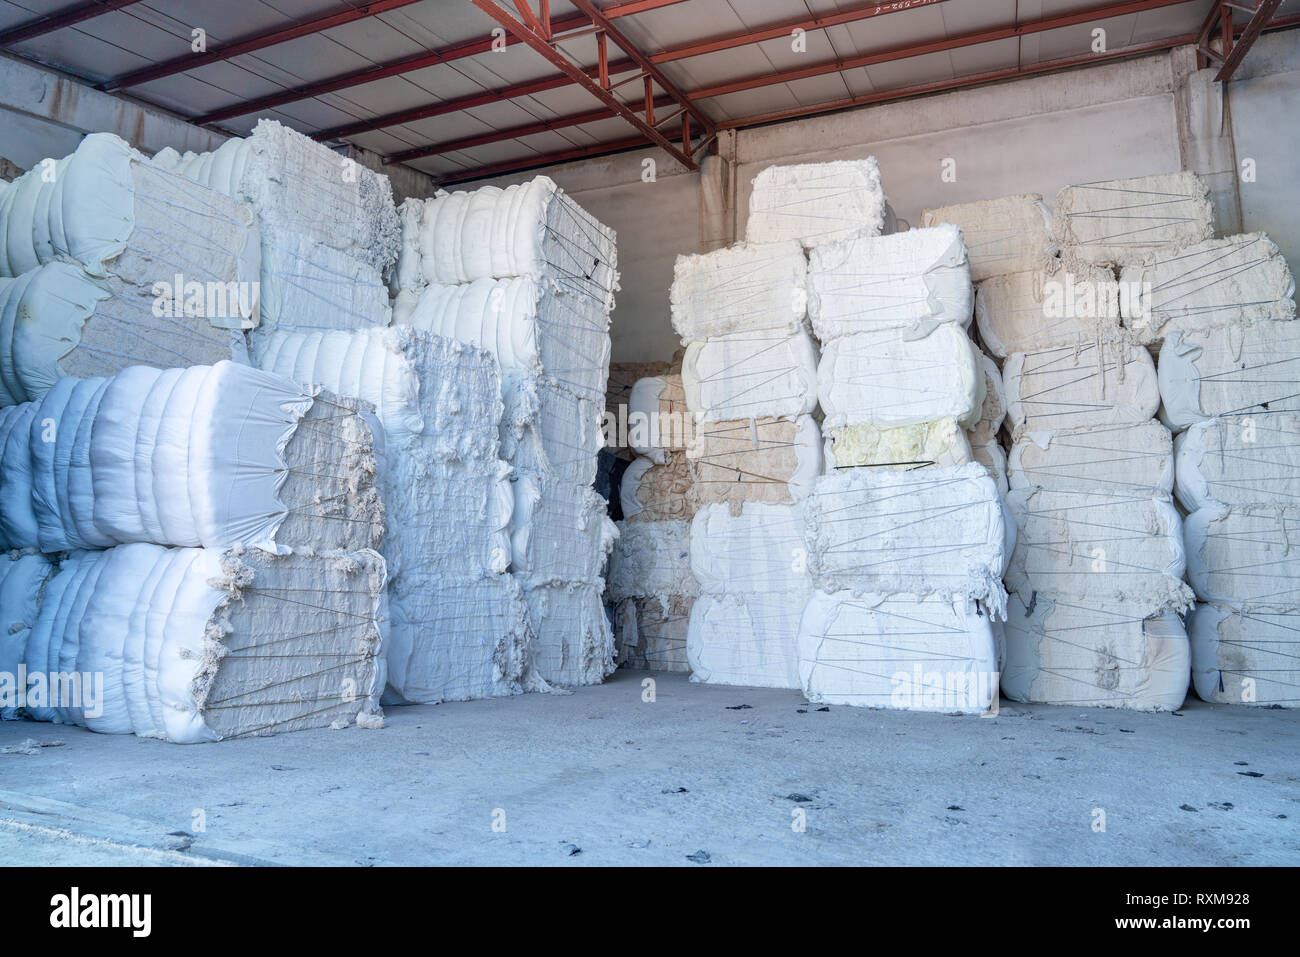 Interior of a storehouse .Stacked waste textile scraps In Bales Stock Photo